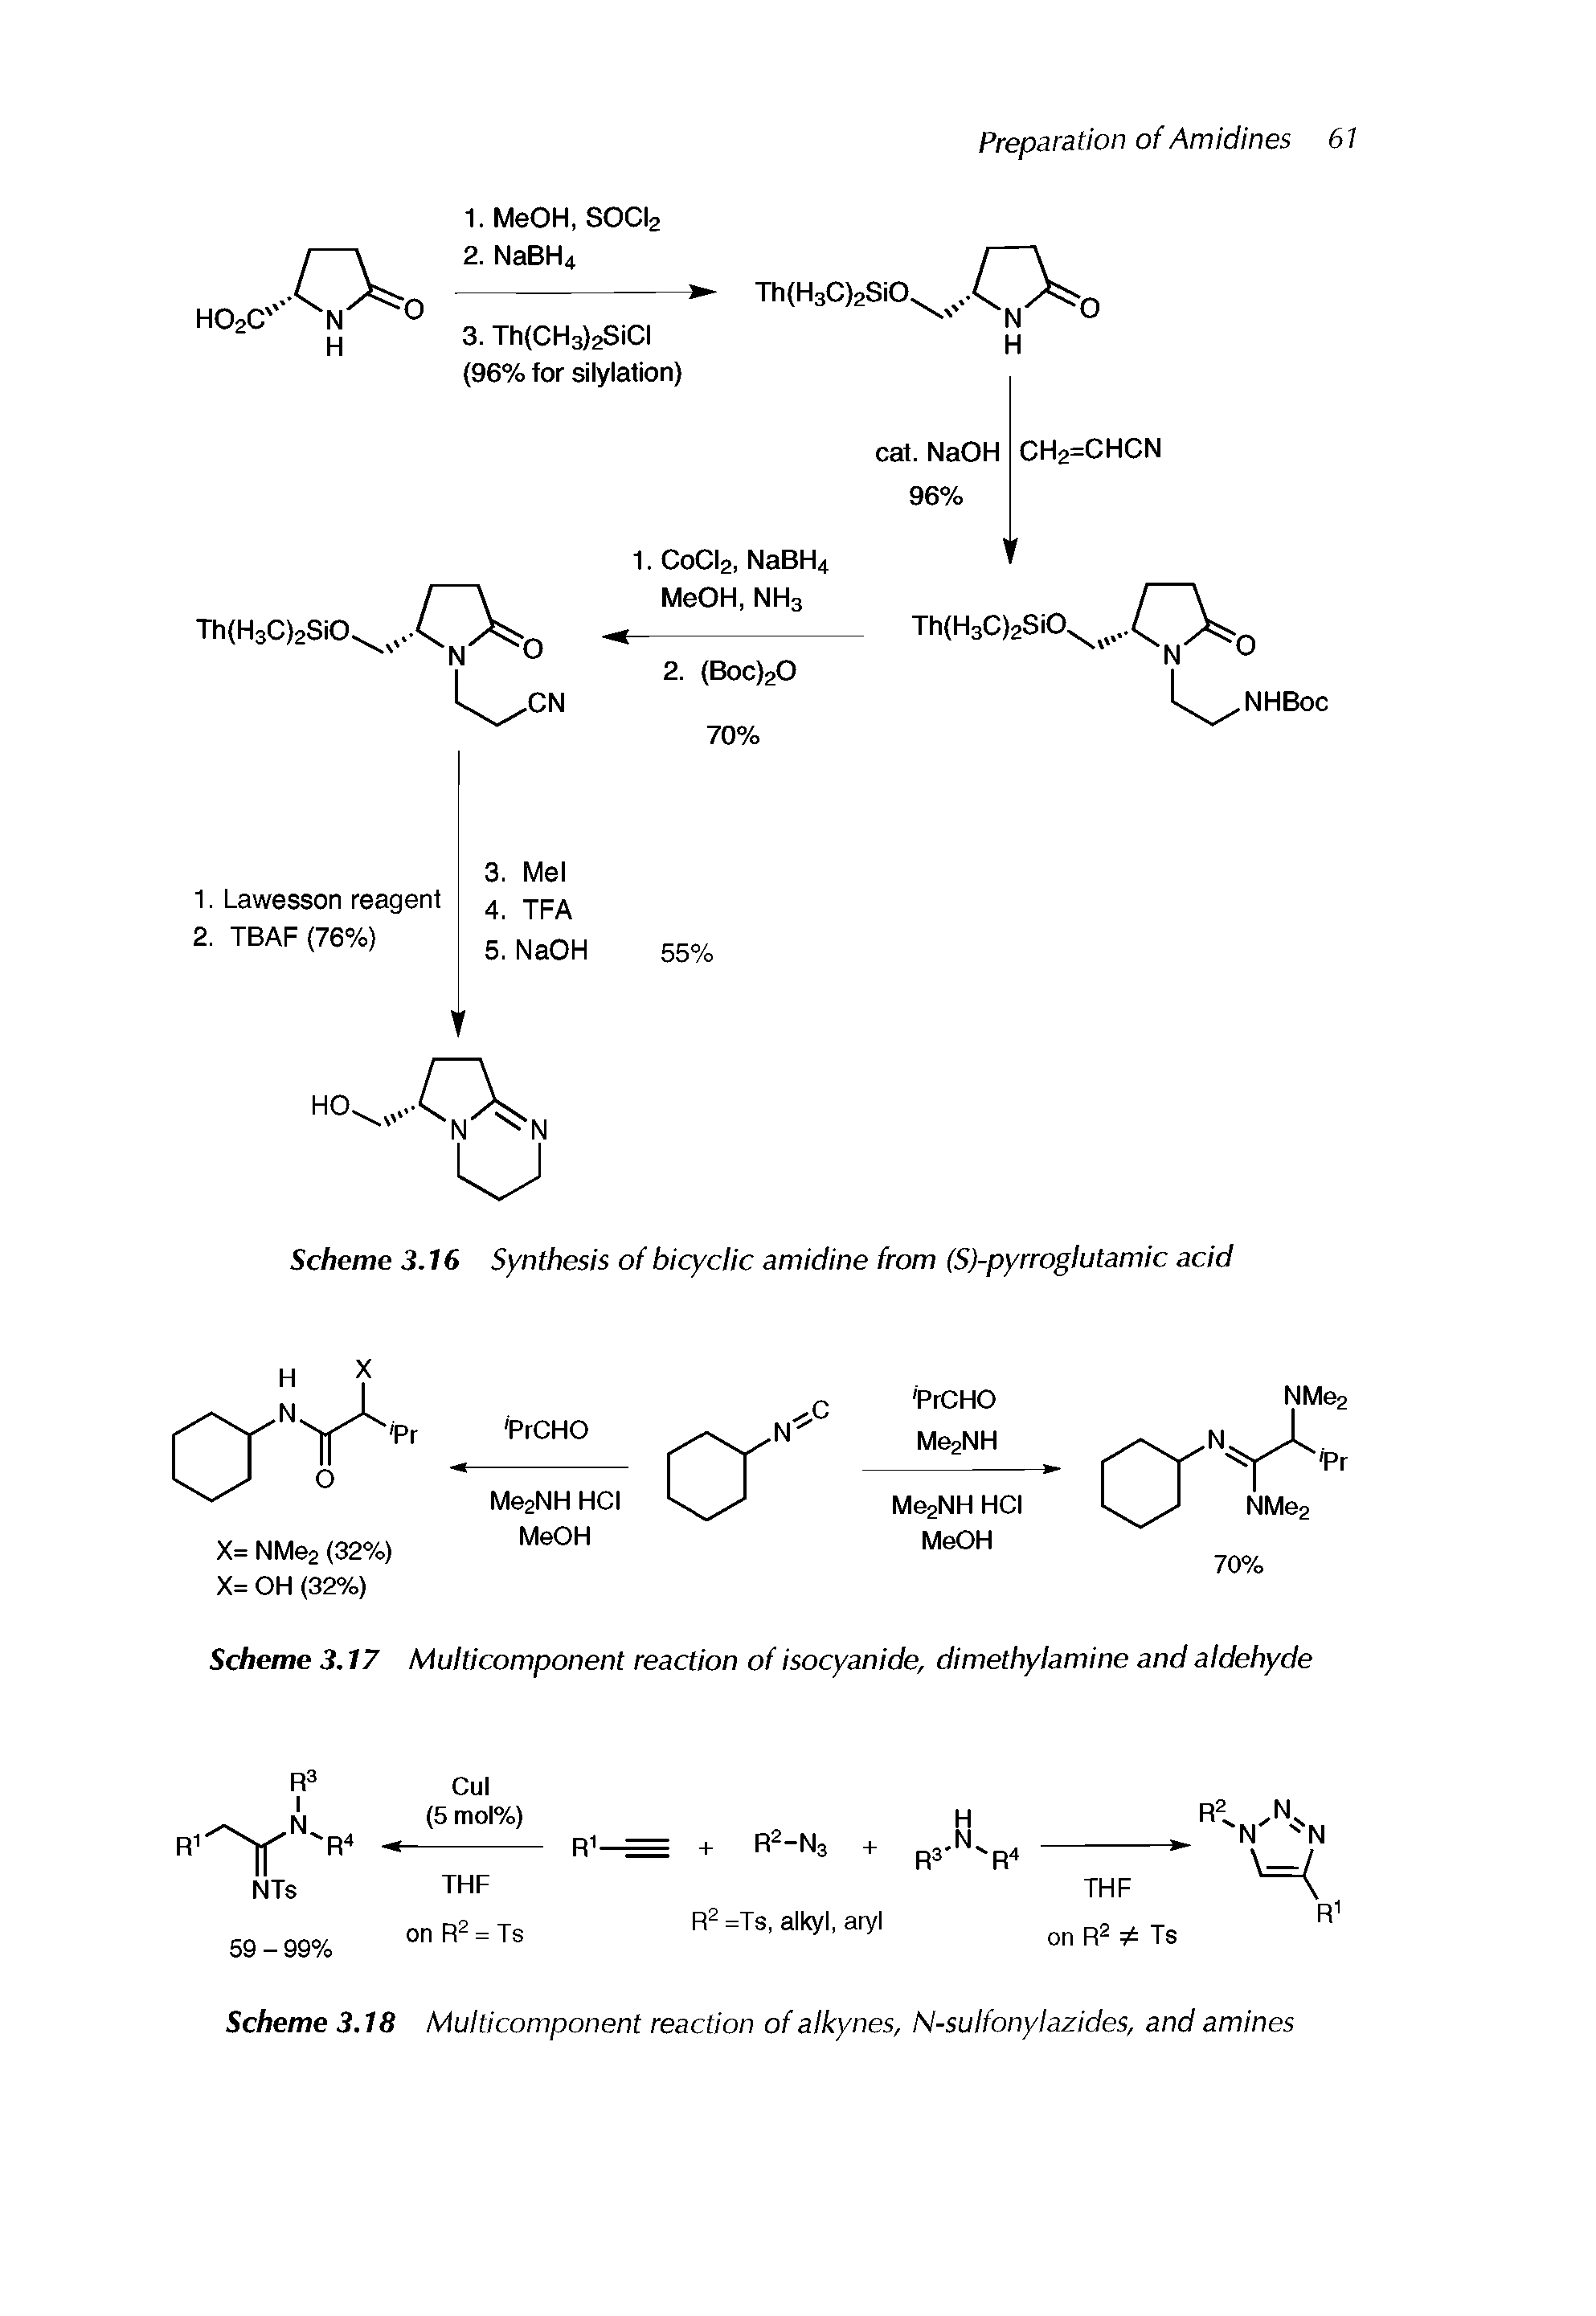 Scheme 3.16 Synthesis of bicy H amidine from (S)-pyrroglutamic acid...